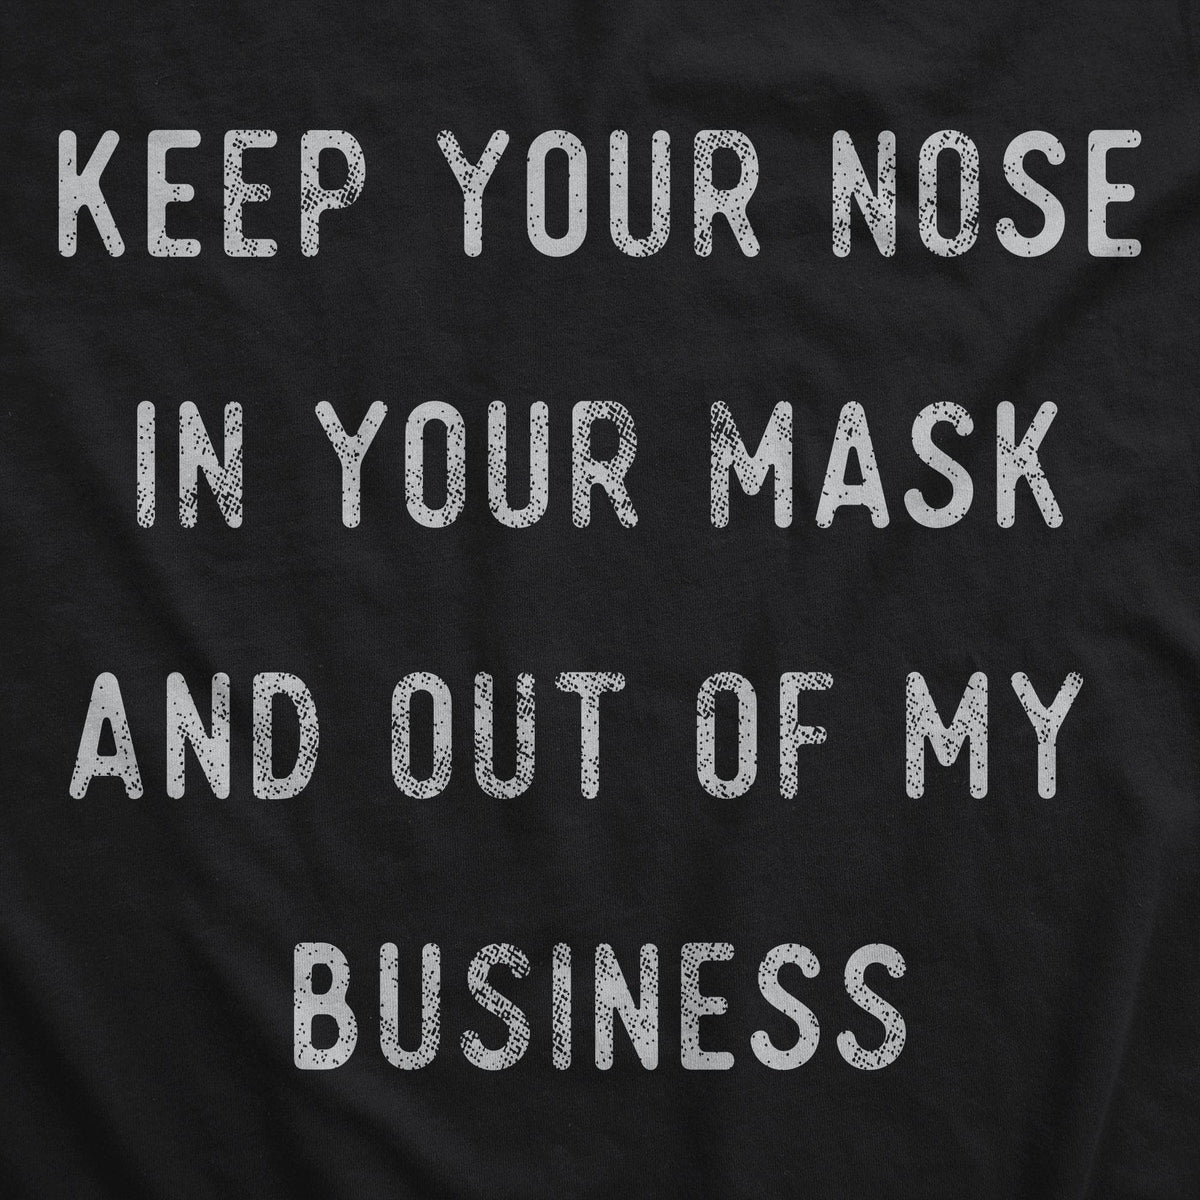 Keep Your Nose In Your Mask And Out Of My Business Face Mask Mask - Crazy Dog T-Shirts